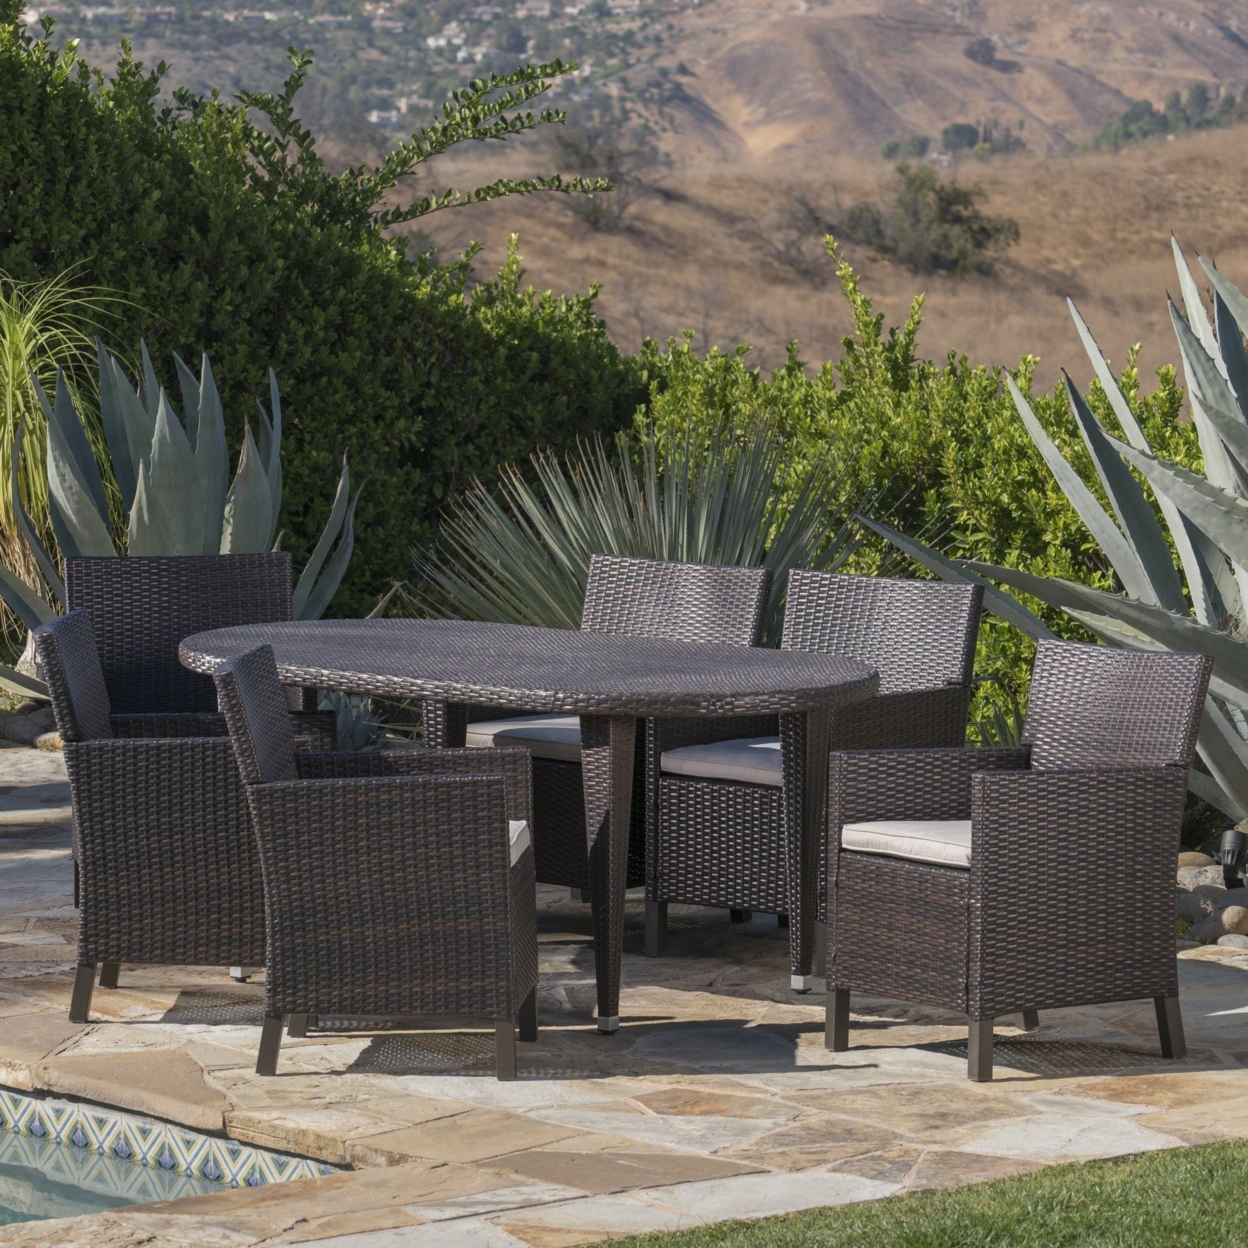 Crete Outdoor 7 Piece Wicker Oval Dining Set With Water Resistant Cushions - Multi-brown